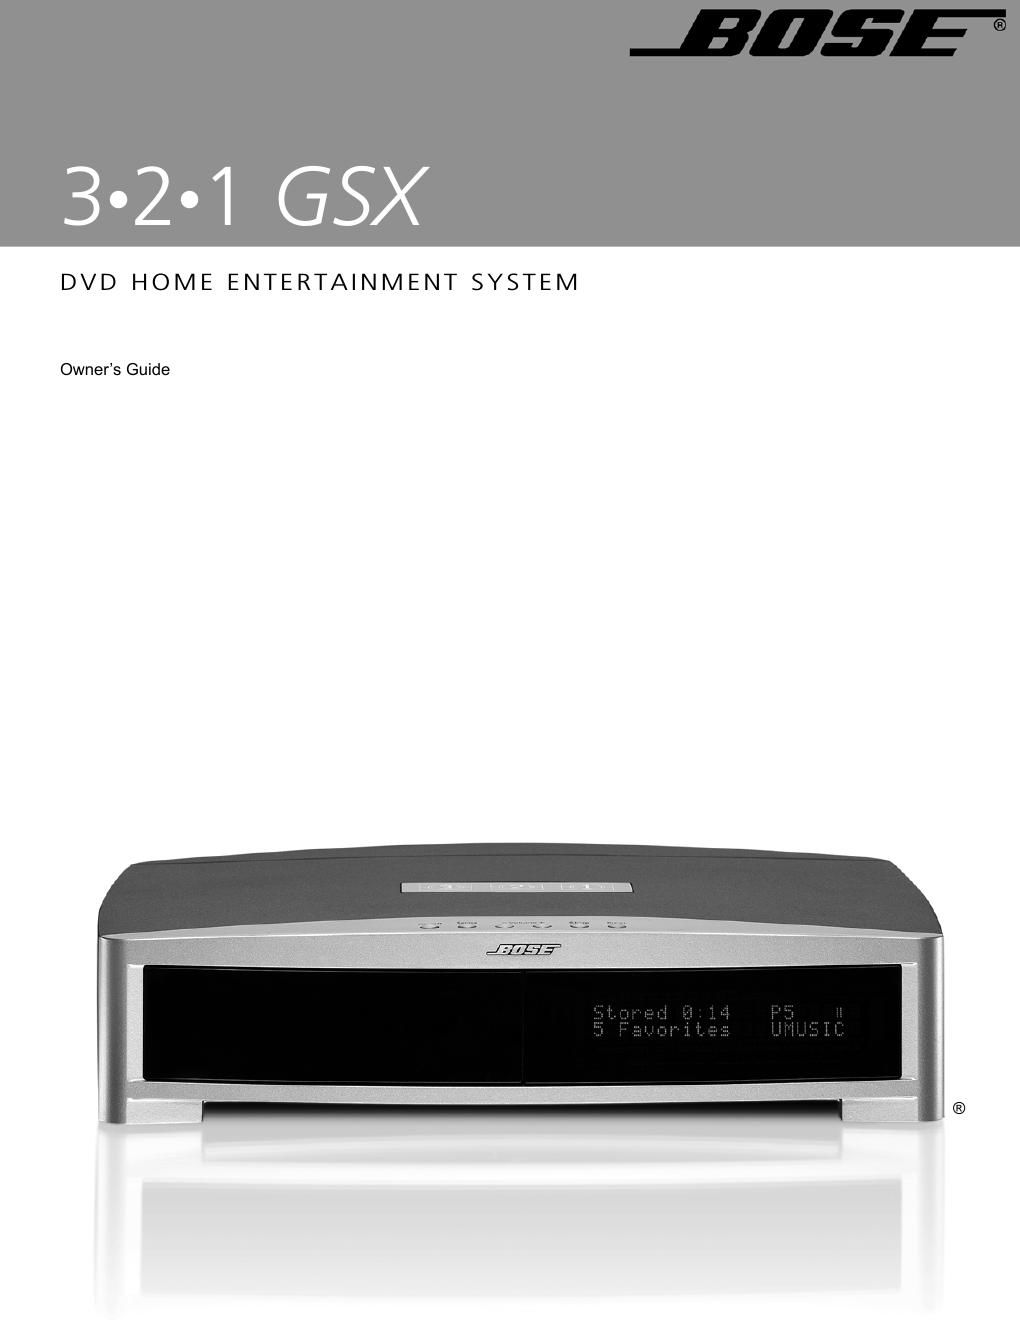 bose 321 gsx owners guide